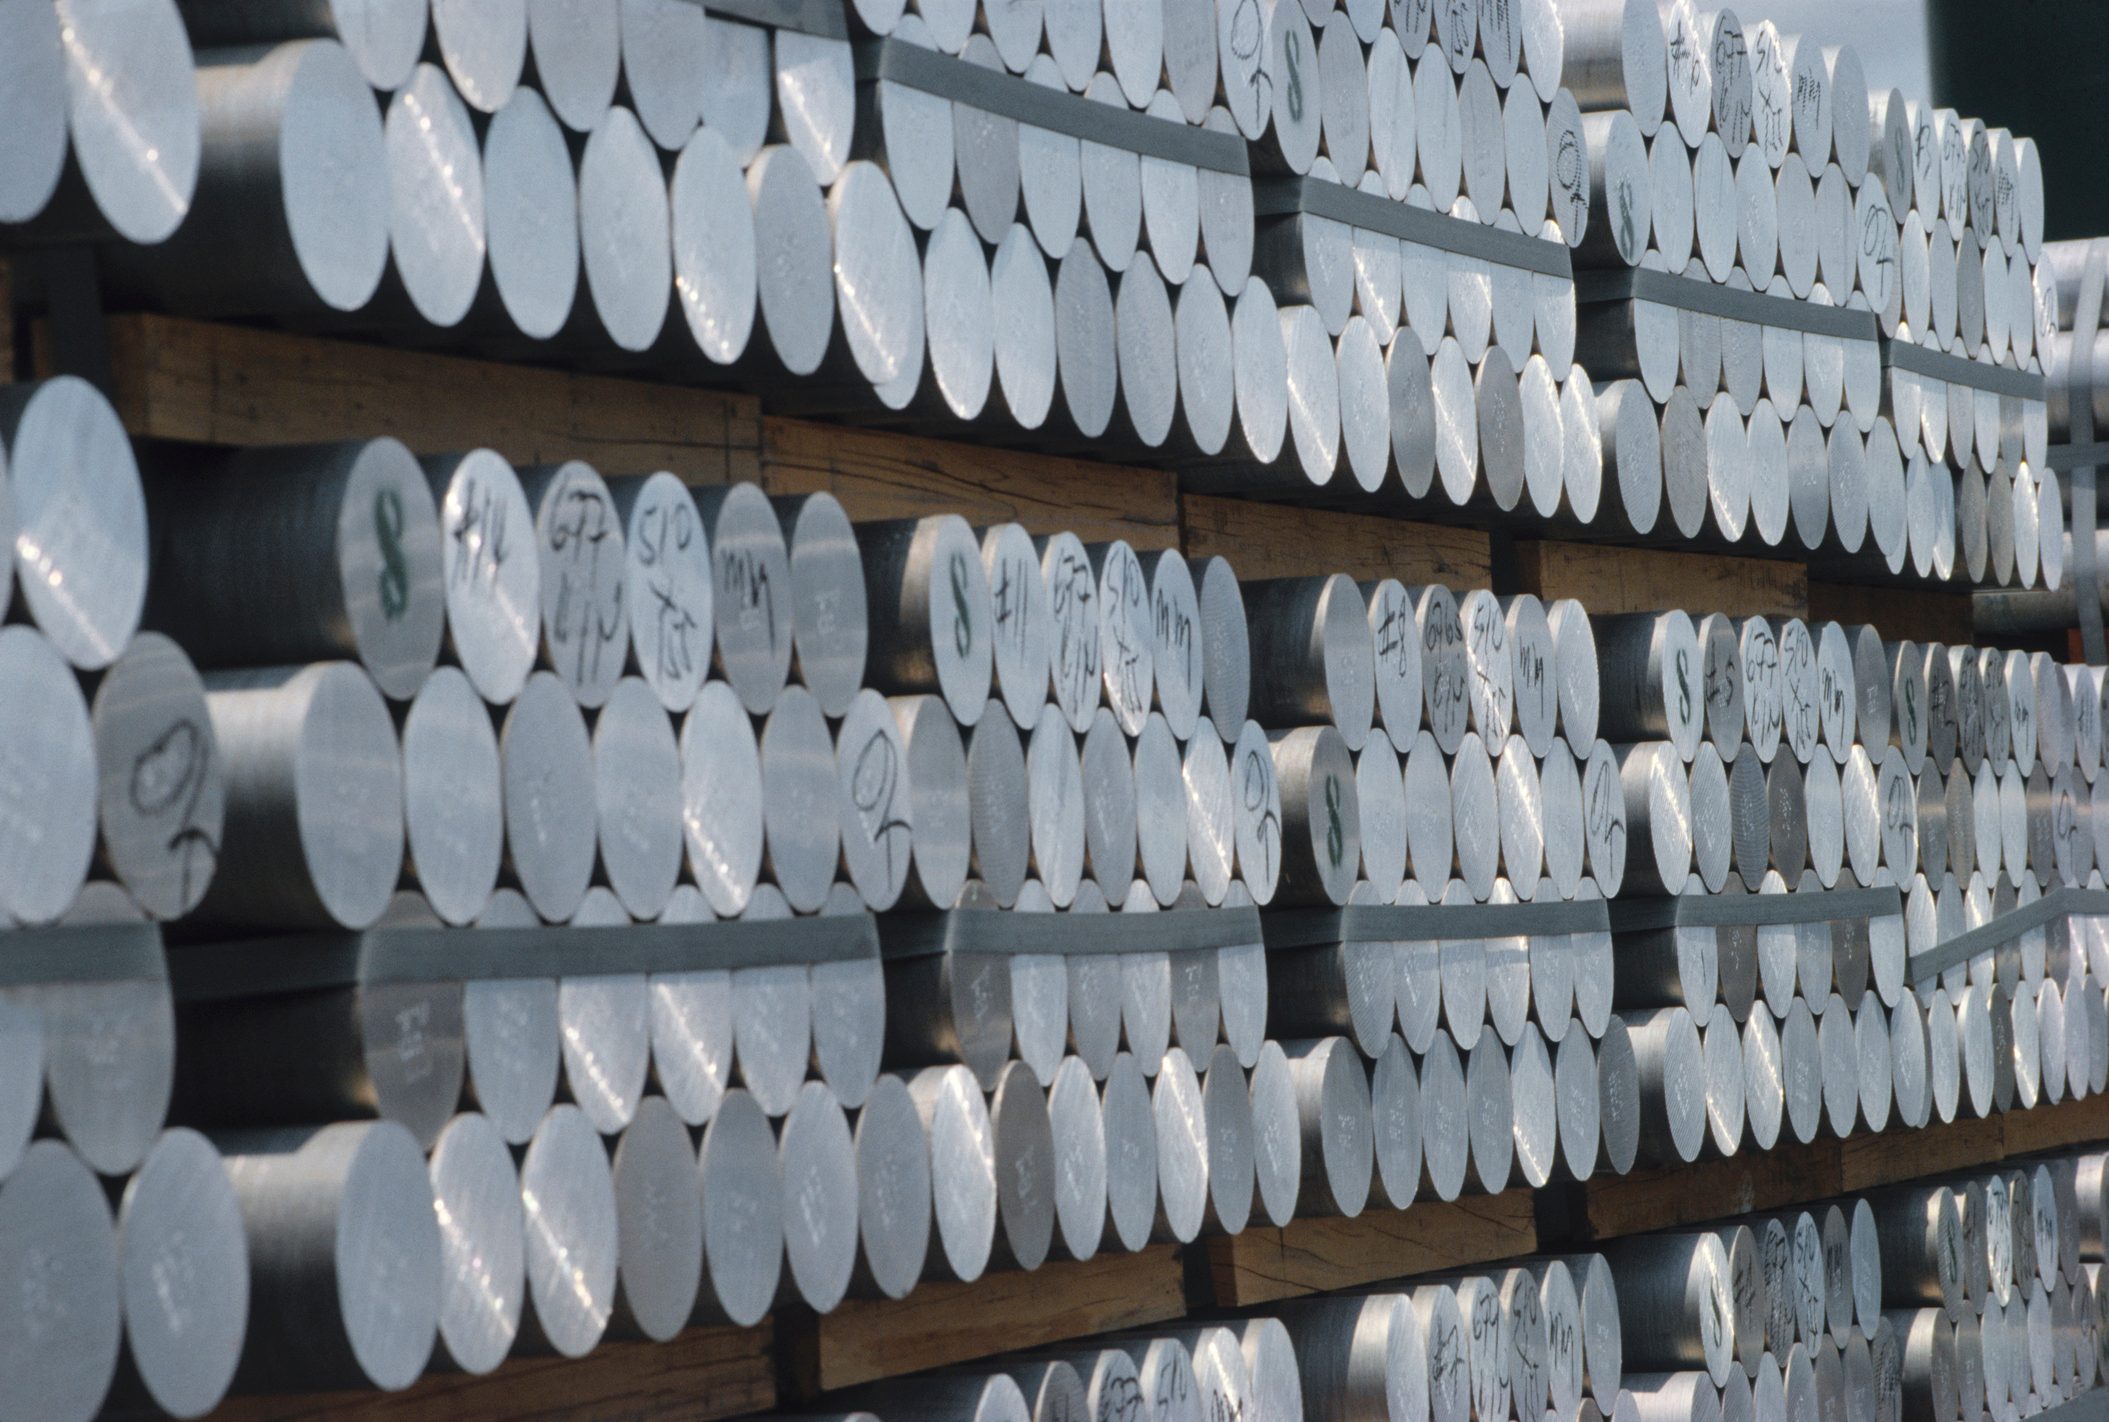 Aluminium billet premiums fall in key global locations except for US market  - Fastmarkets